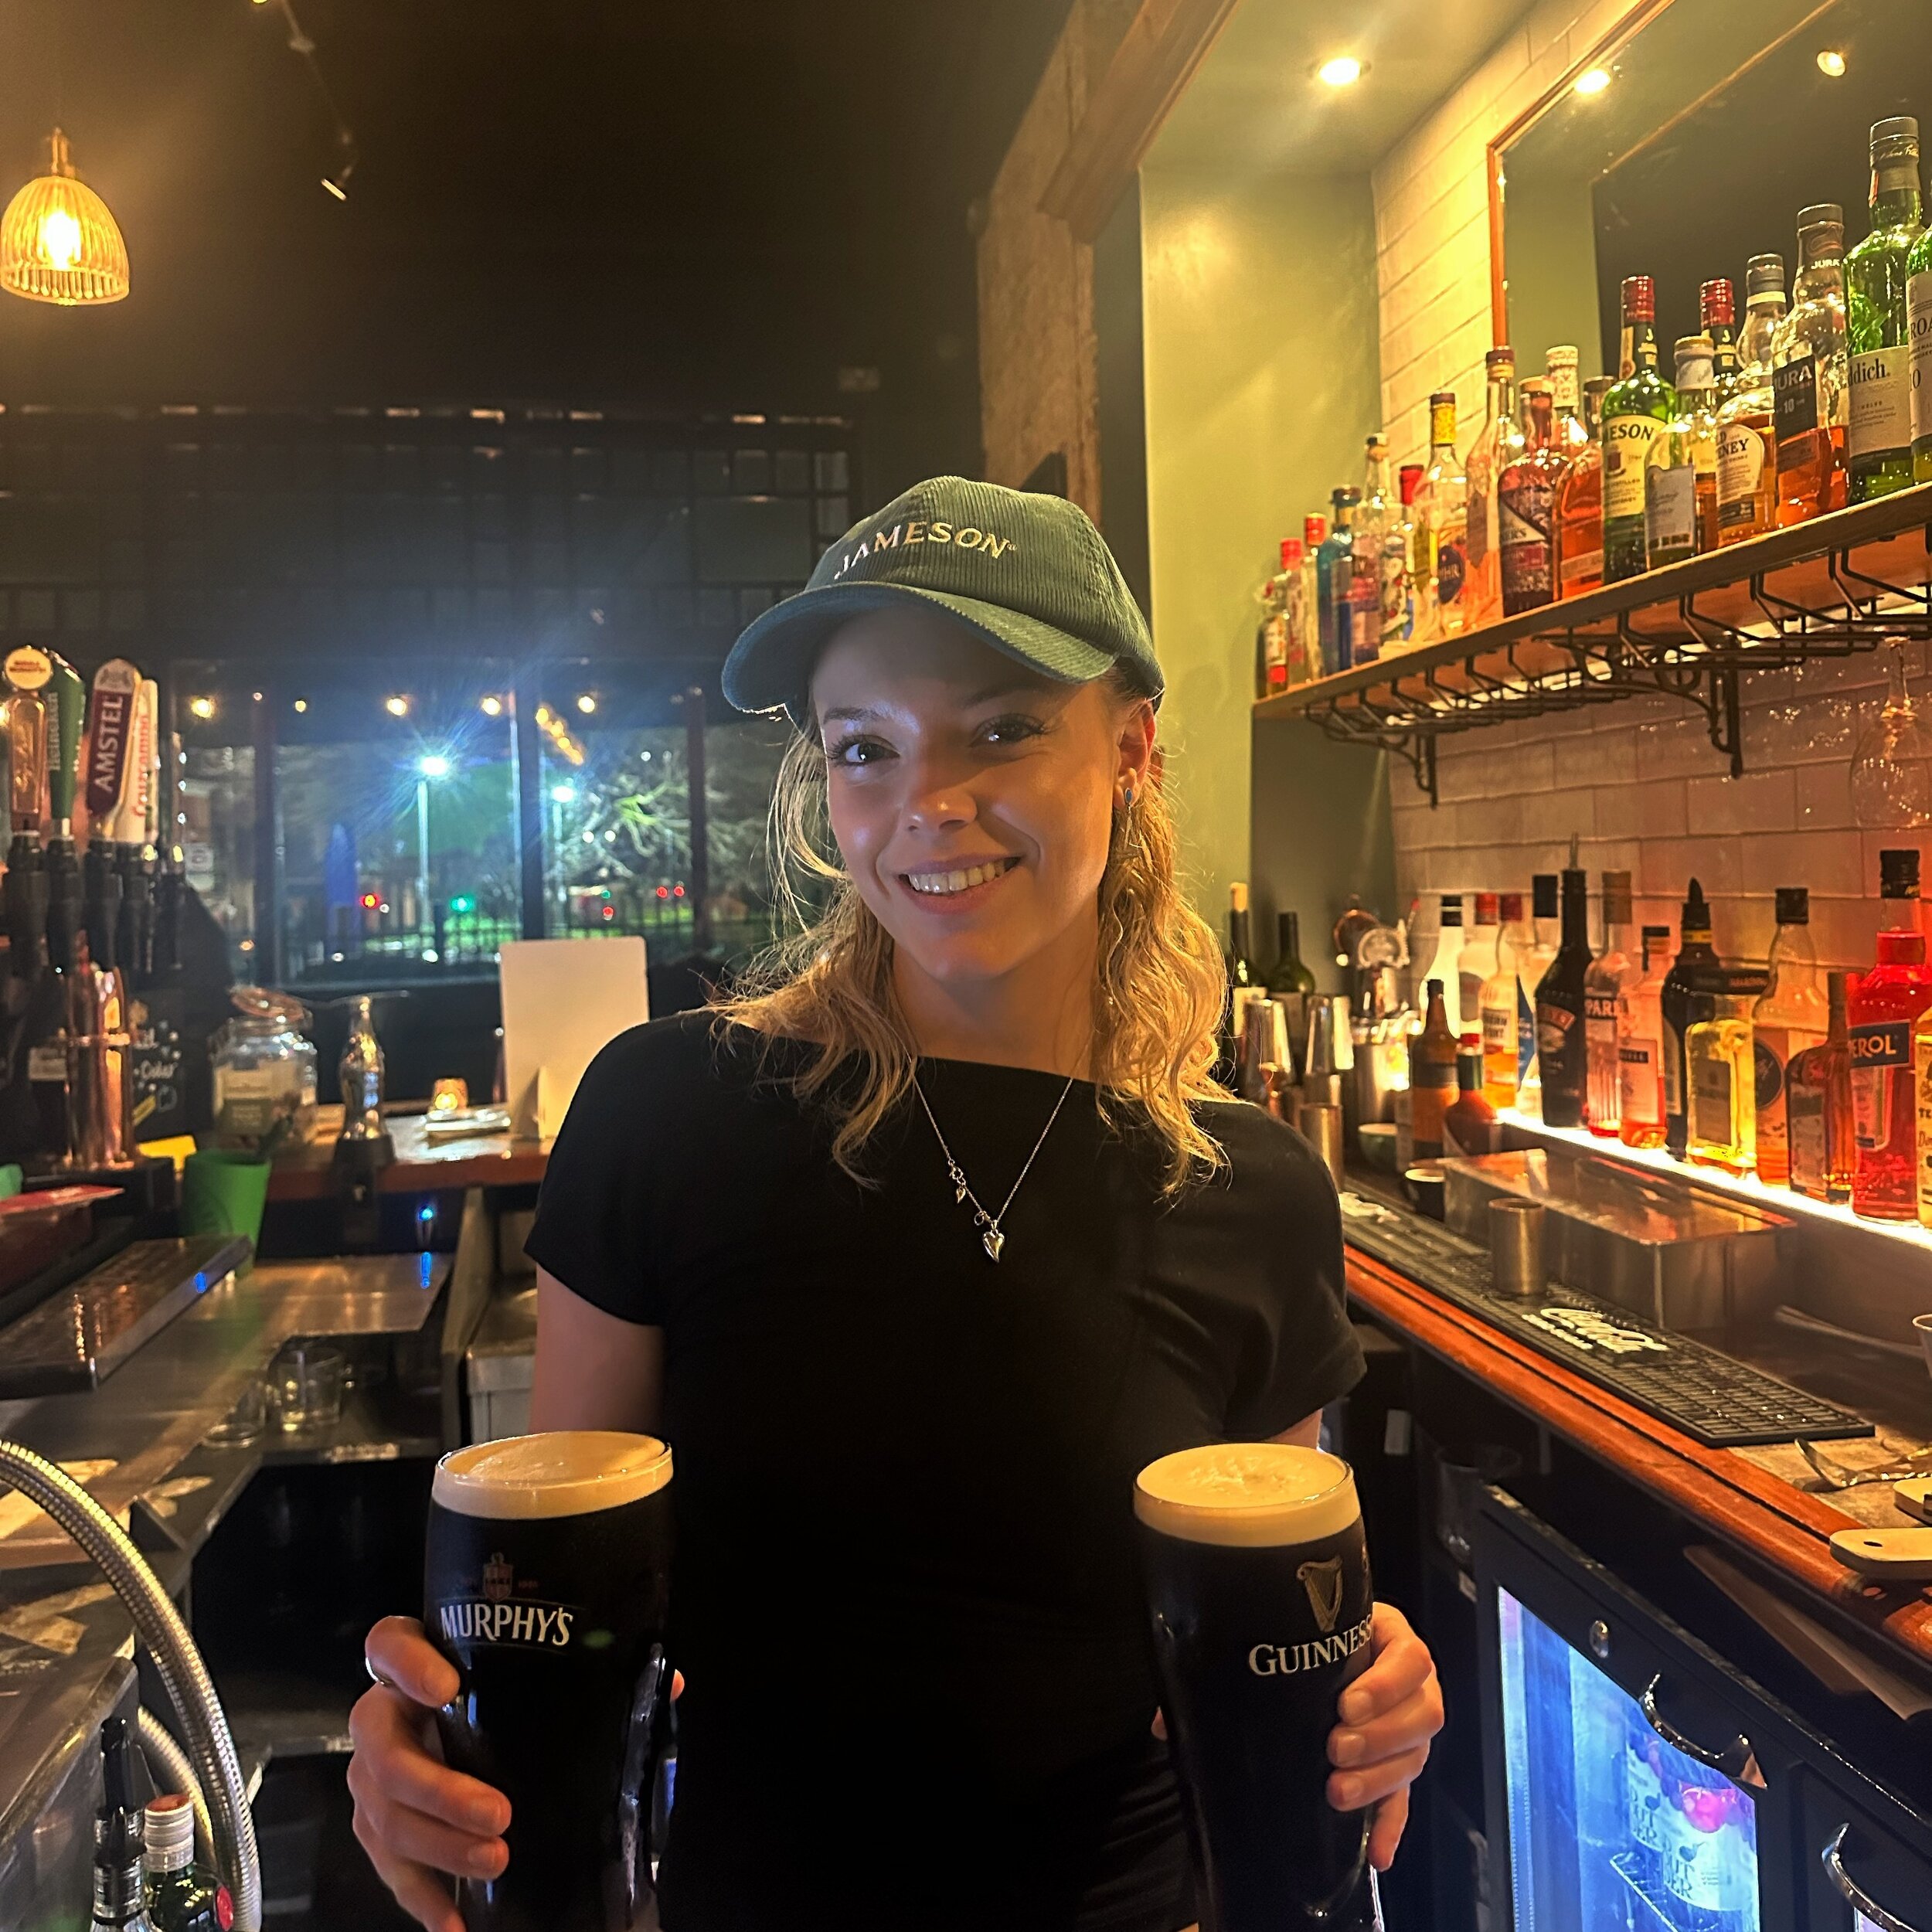 Murphy&rsquo;s or Guinness, take your pick 🍀

This St Paddy&rsquo;s weekend we&rsquo;ve got you covered - Murphys and Guinness on tap, Irish cocktail specials and Irish menu specials! 🇮🇪☘️

#murphys #guinness #stout #jamesons #ireland #paddysday #